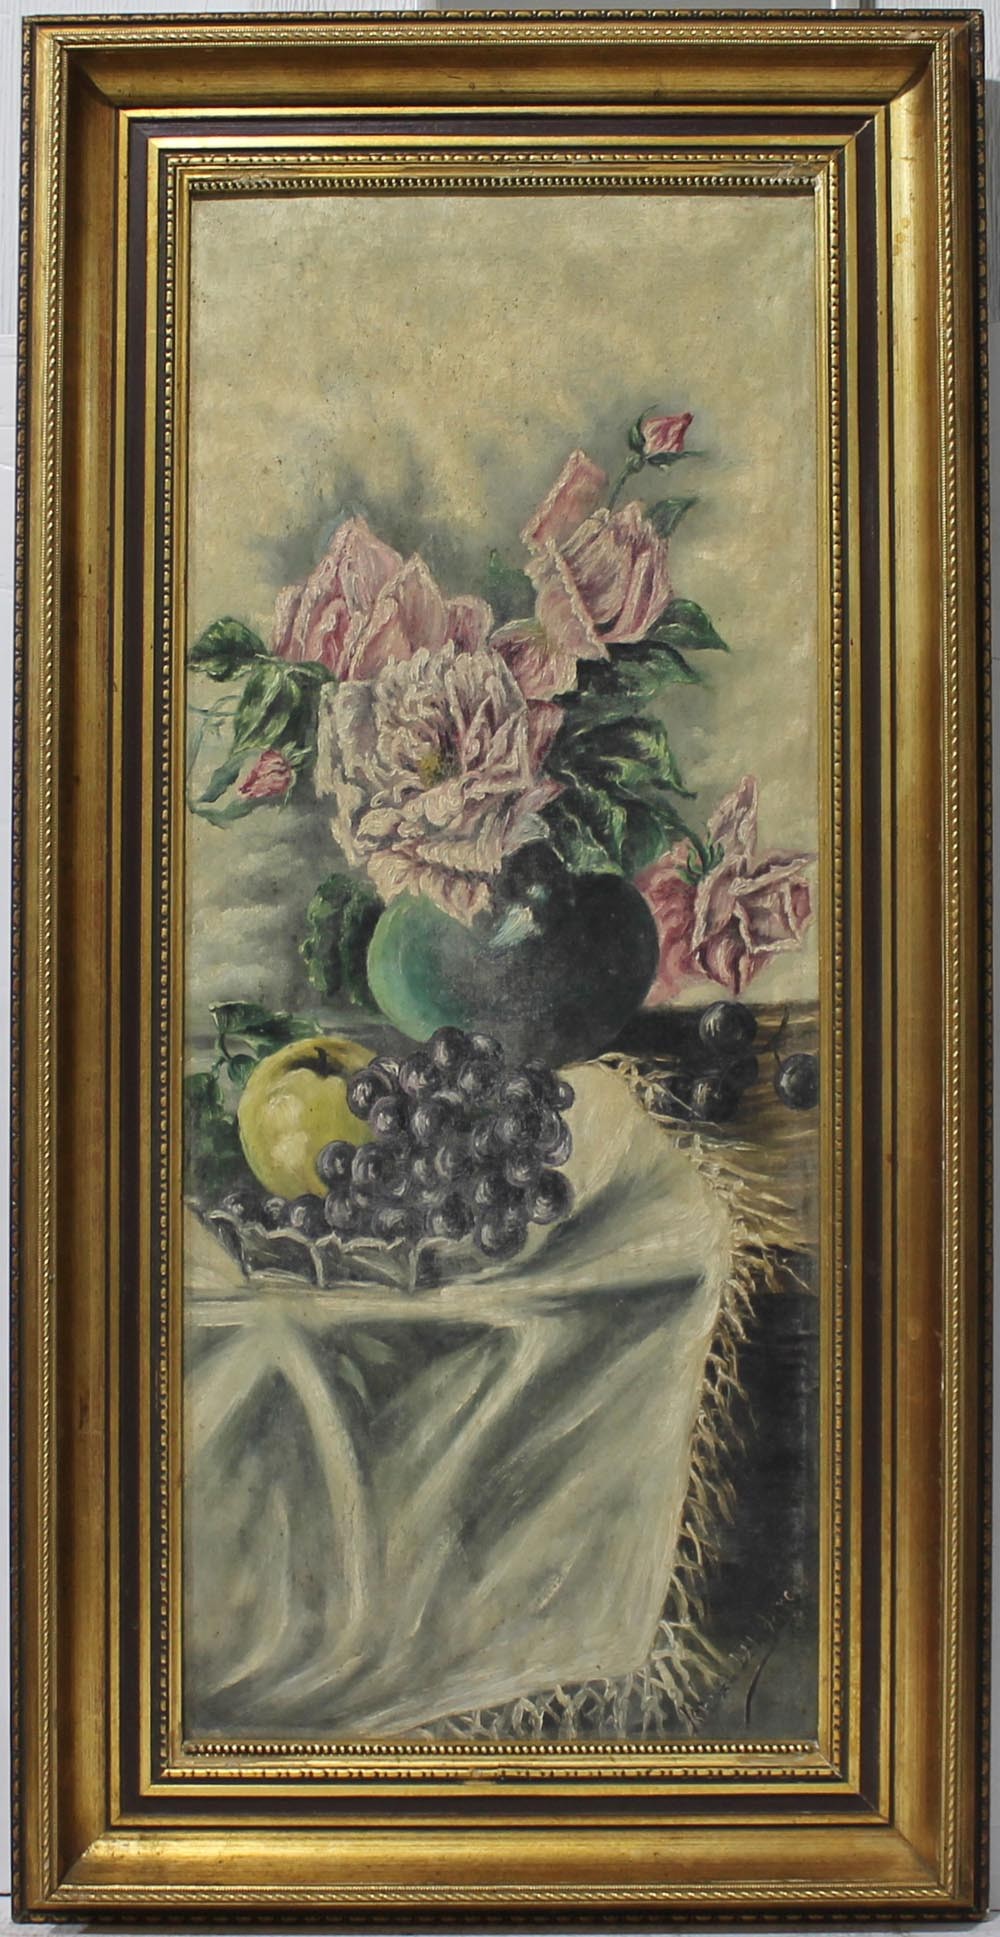 Isabel del Arco: Still life of flowers and grapes